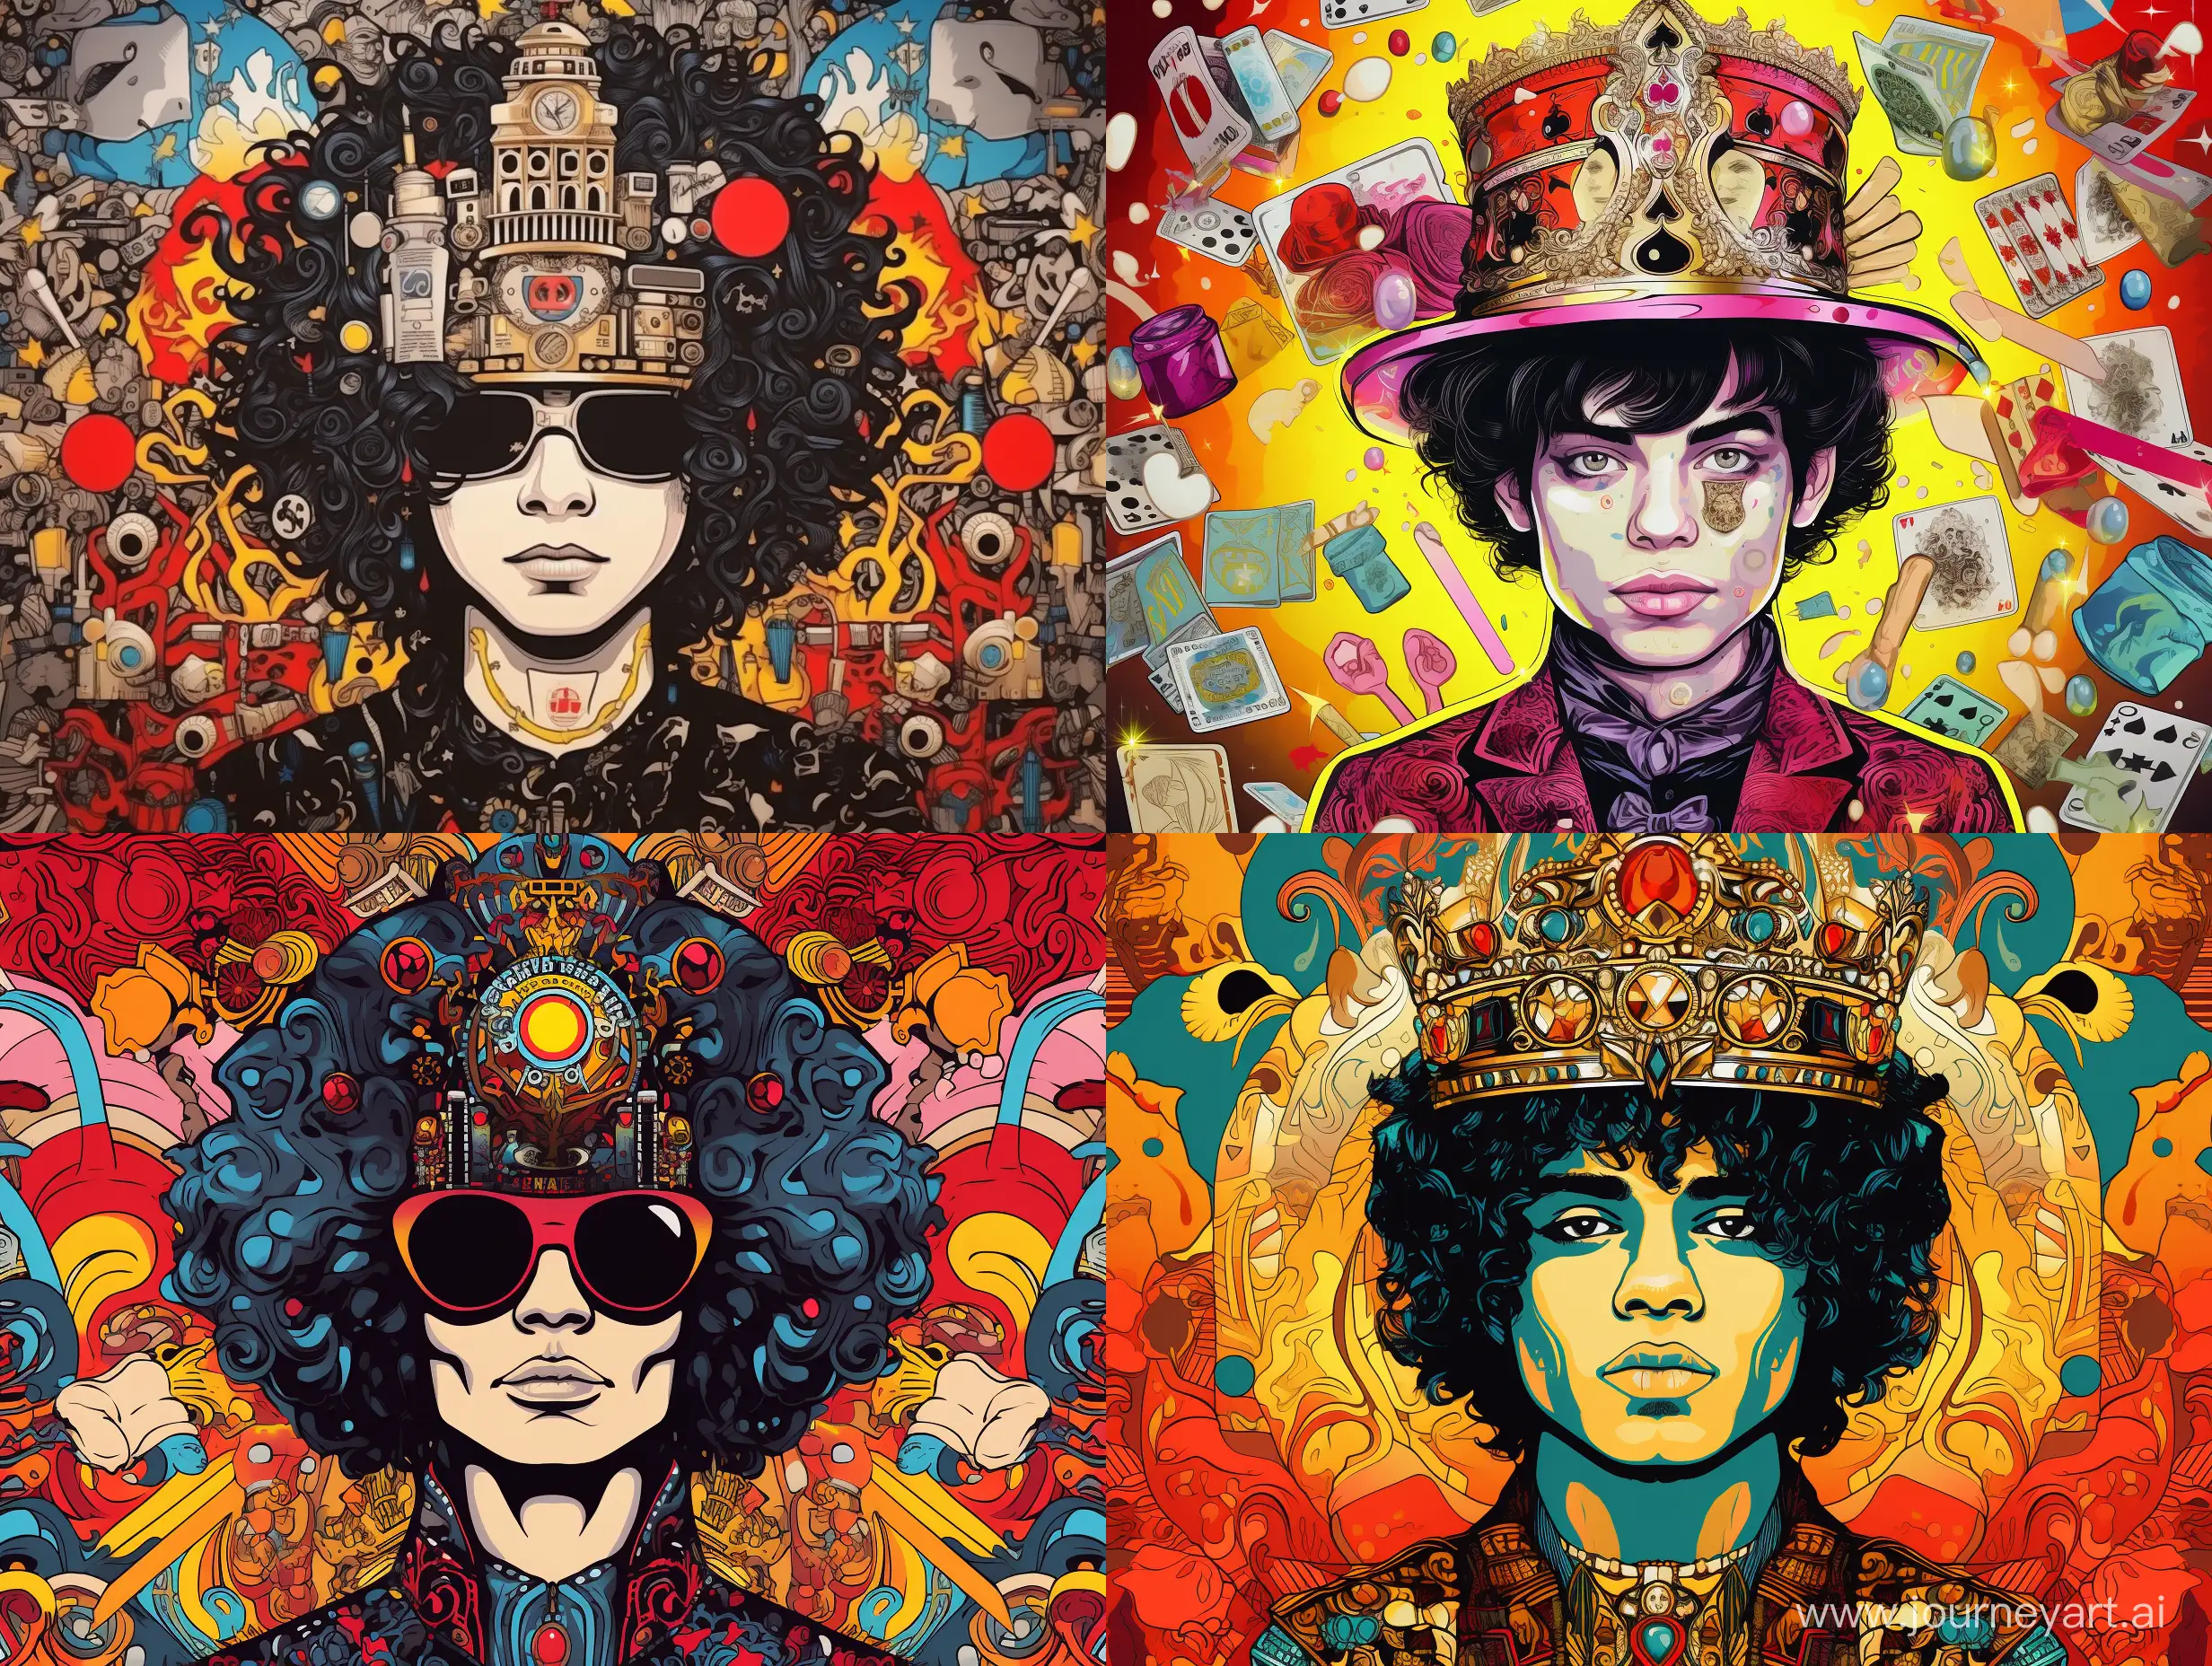 Waist portrait of the king of music, young Michael Jackson, without a hat, without glasses, with a crown on his head, against a background of musical symbols, many details, complex colors, caricature, pop art style